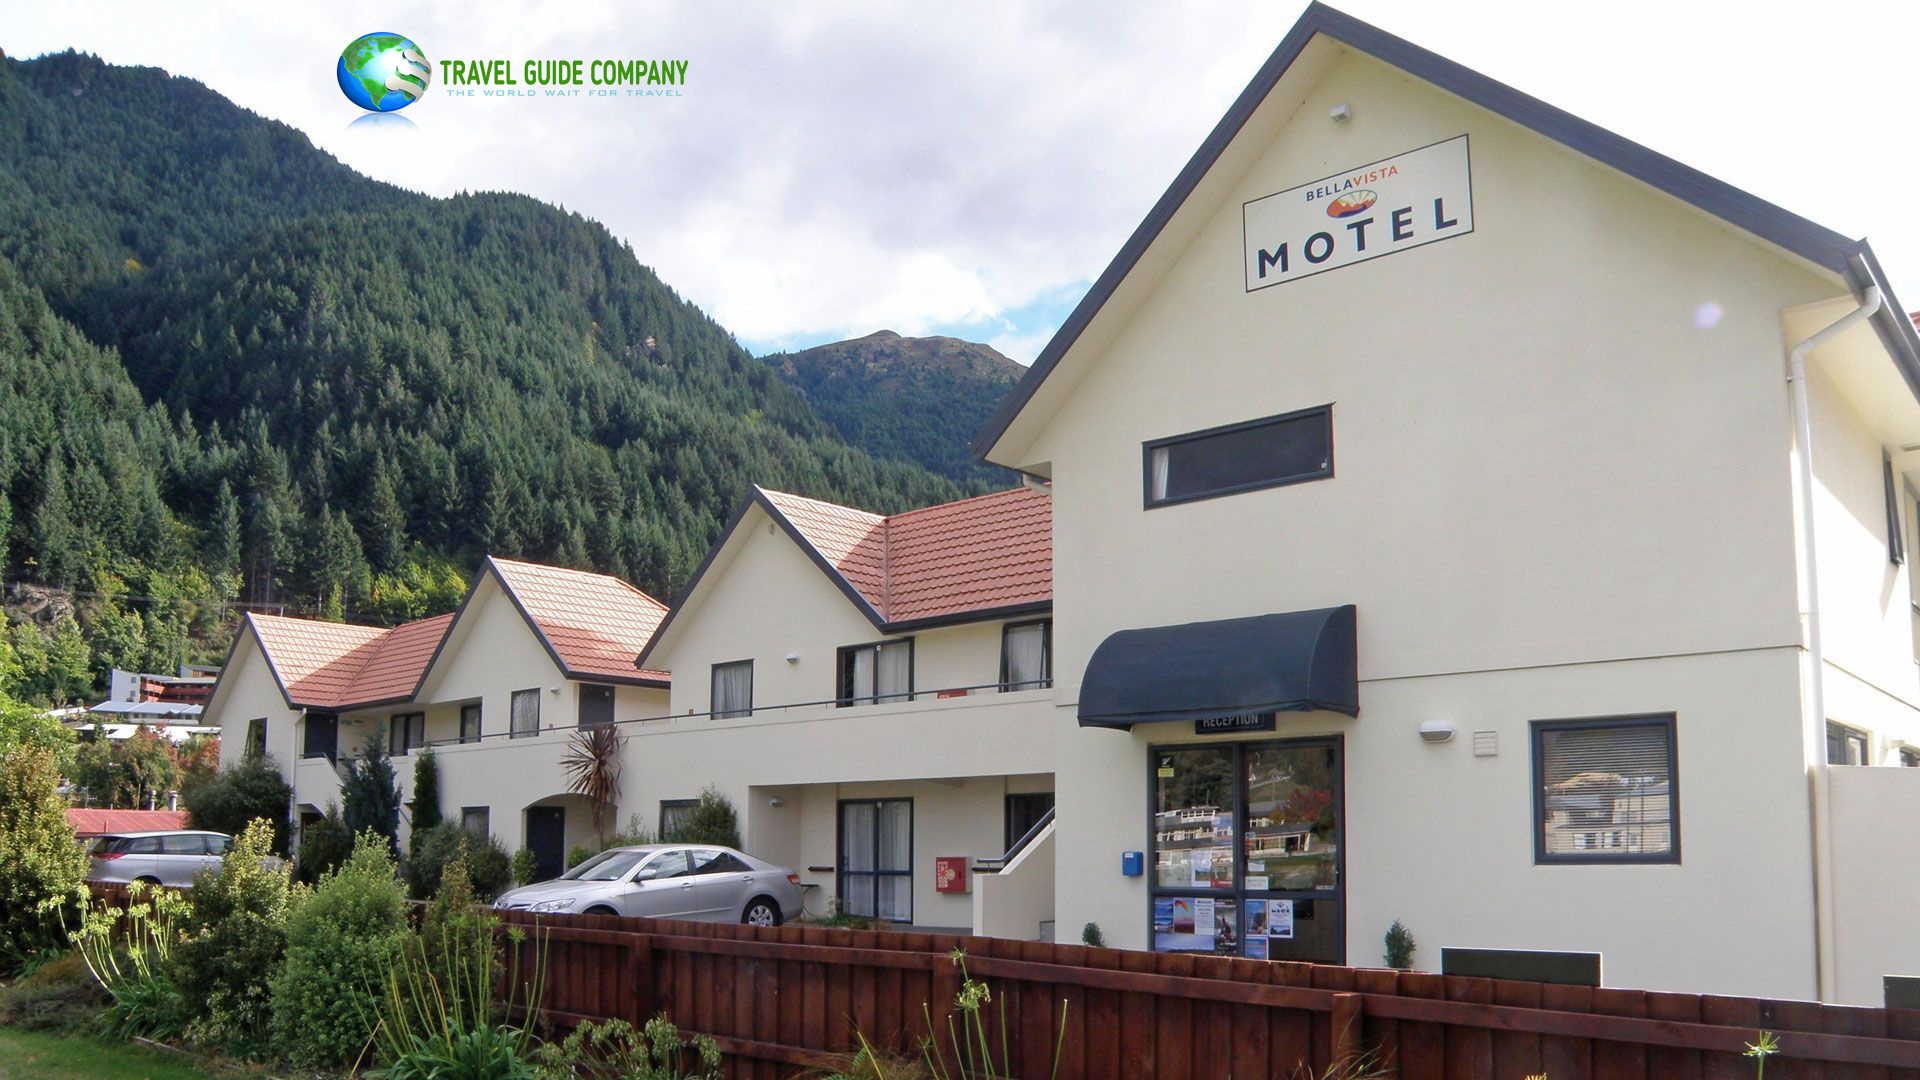 Why Motels are much better than hotels to stay? - Travel Guide Company